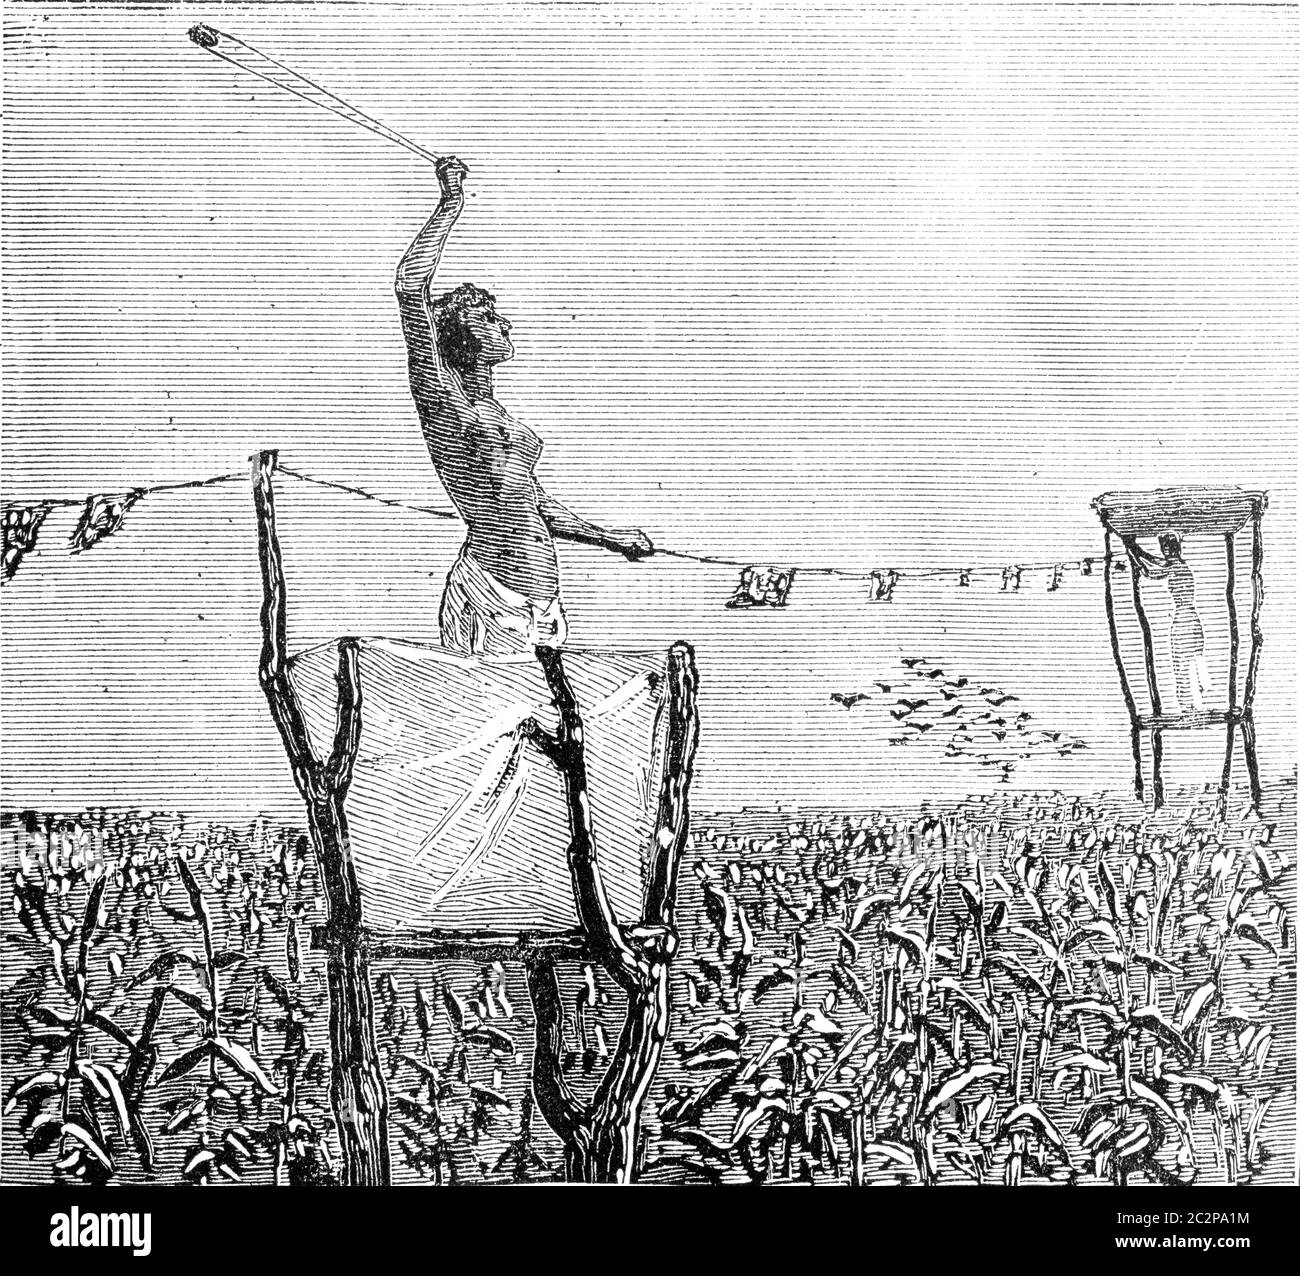 Woman protecting the crops in a field from birds using a slingshot. From Travel Diaries, vintage engraving, 1884-85. Stock Photo